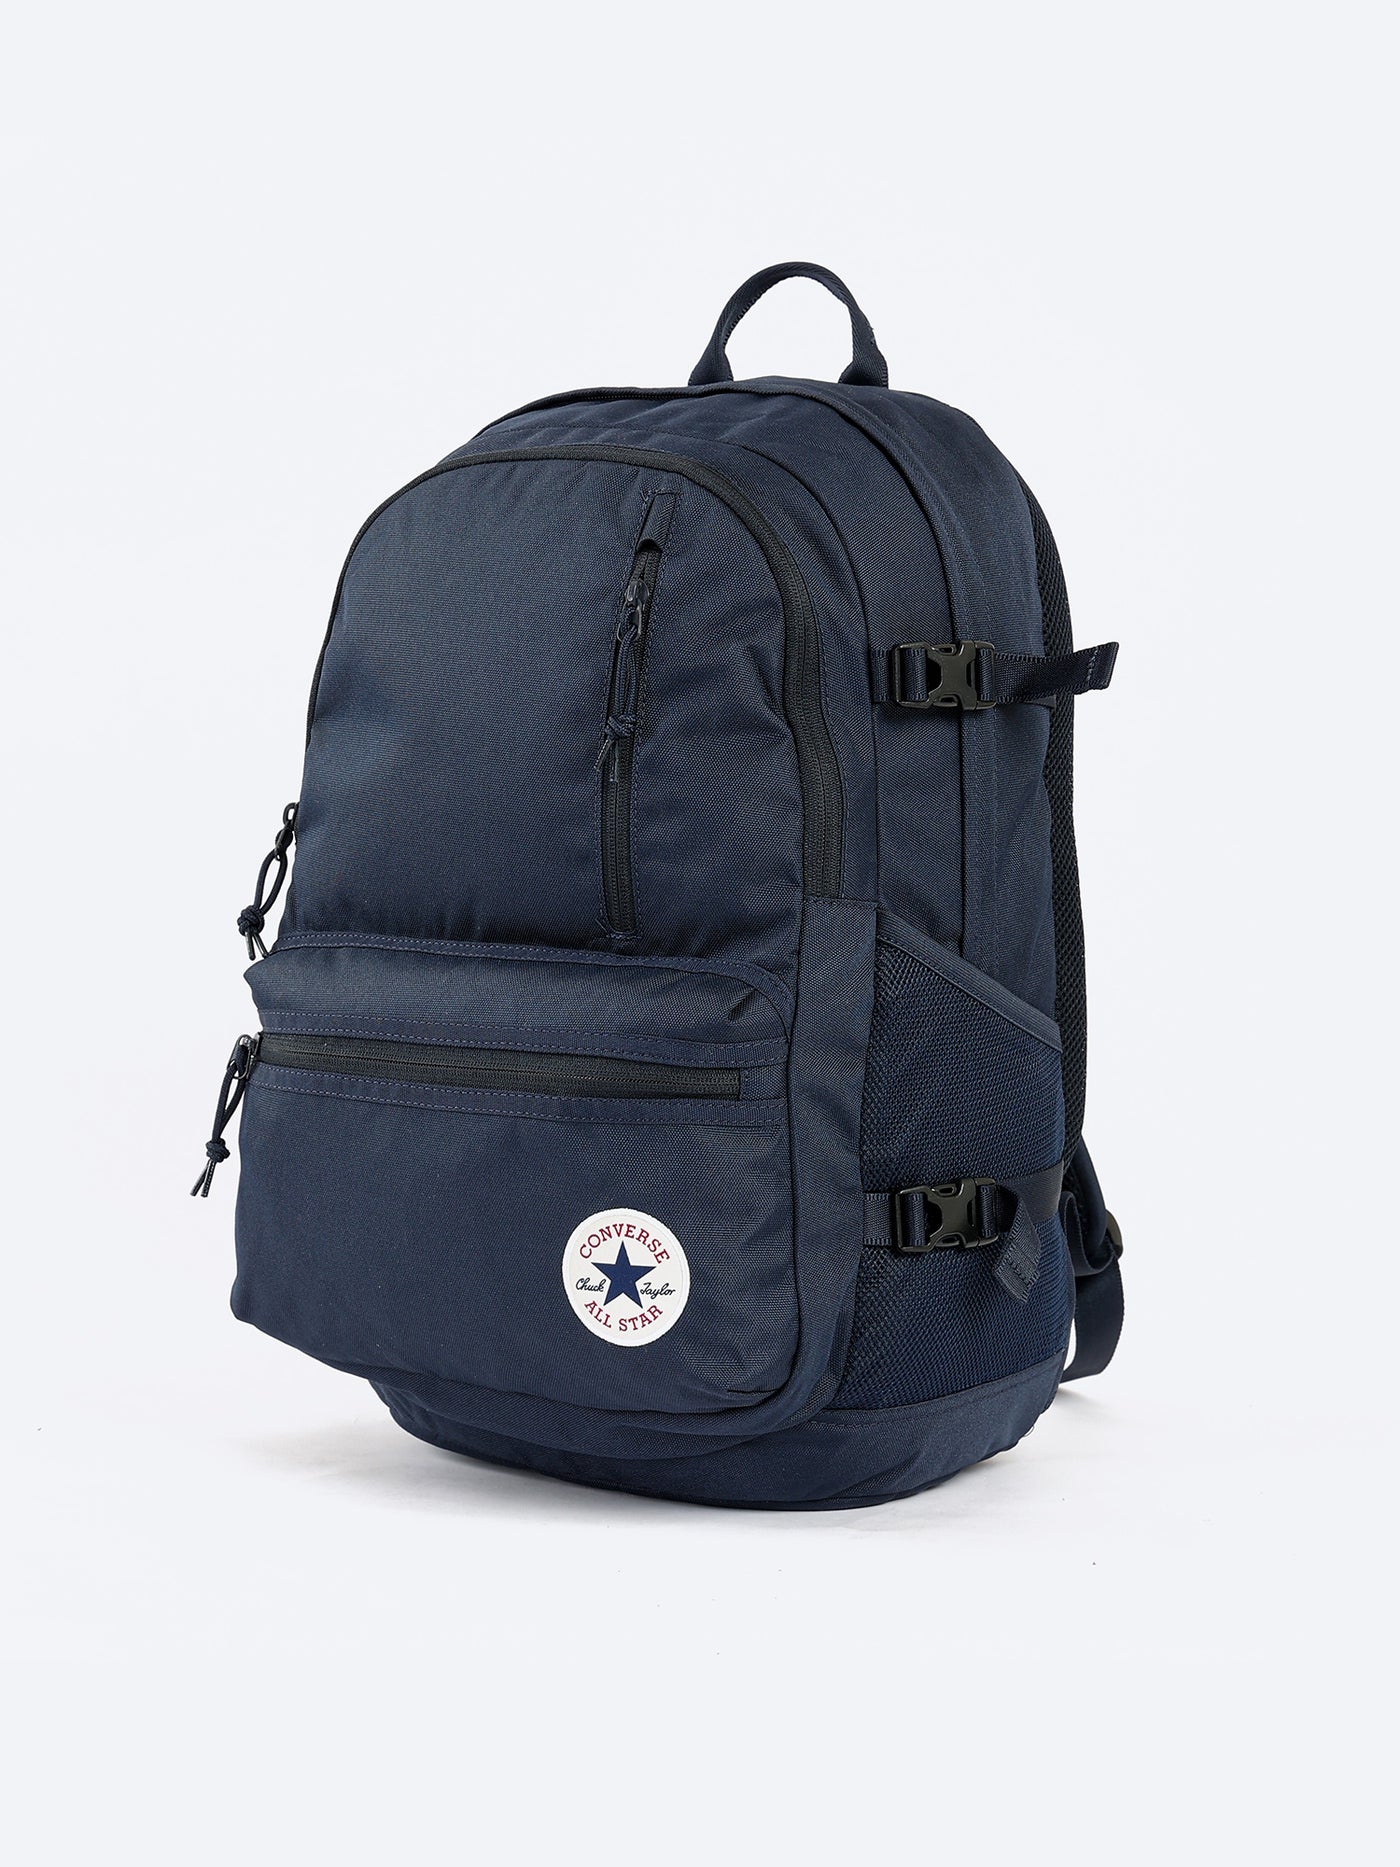 Unisex Backpack - Straight Edge - Casual